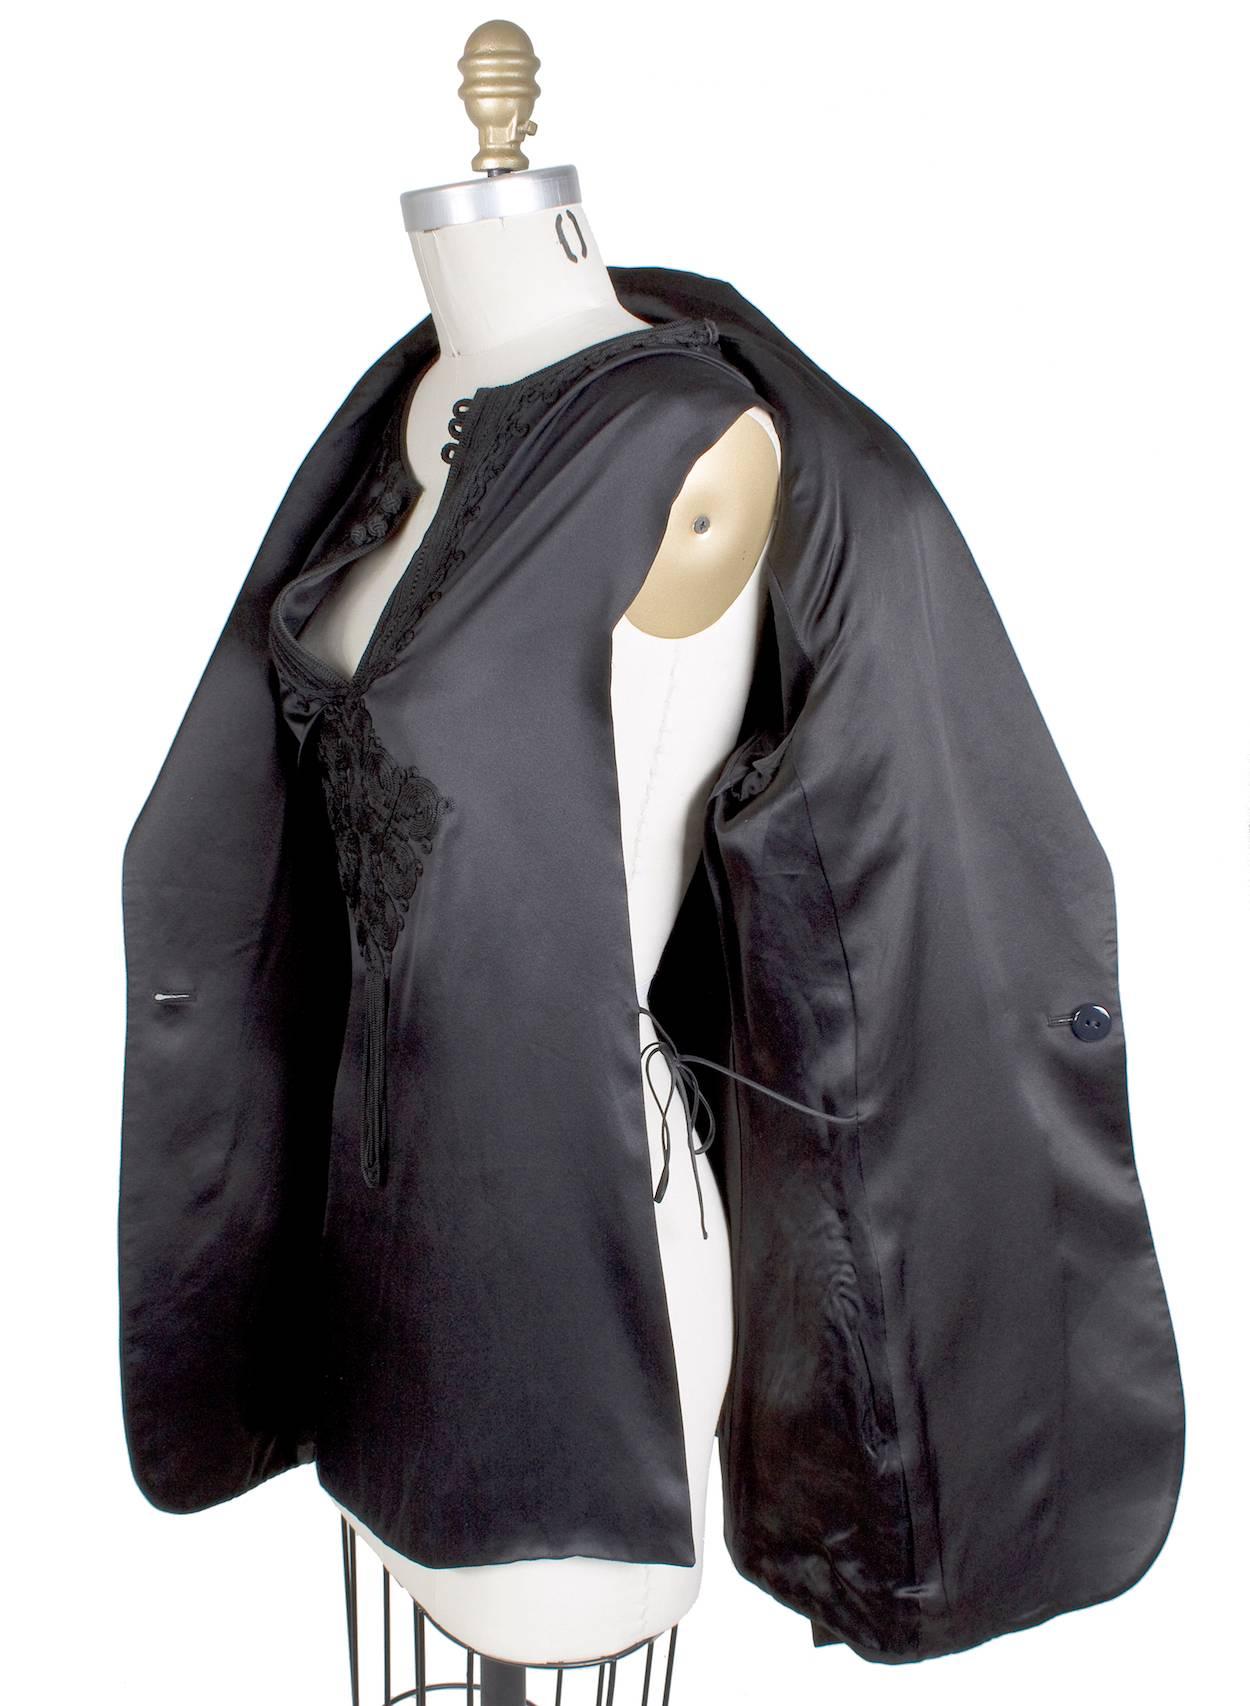 This is a black blazer by Jean Paul Gaultier c. 1990s.  It features an attached silk shirt that is embroidered with a thick thread.  

16" shoulder to shoulder
26" long sleeves